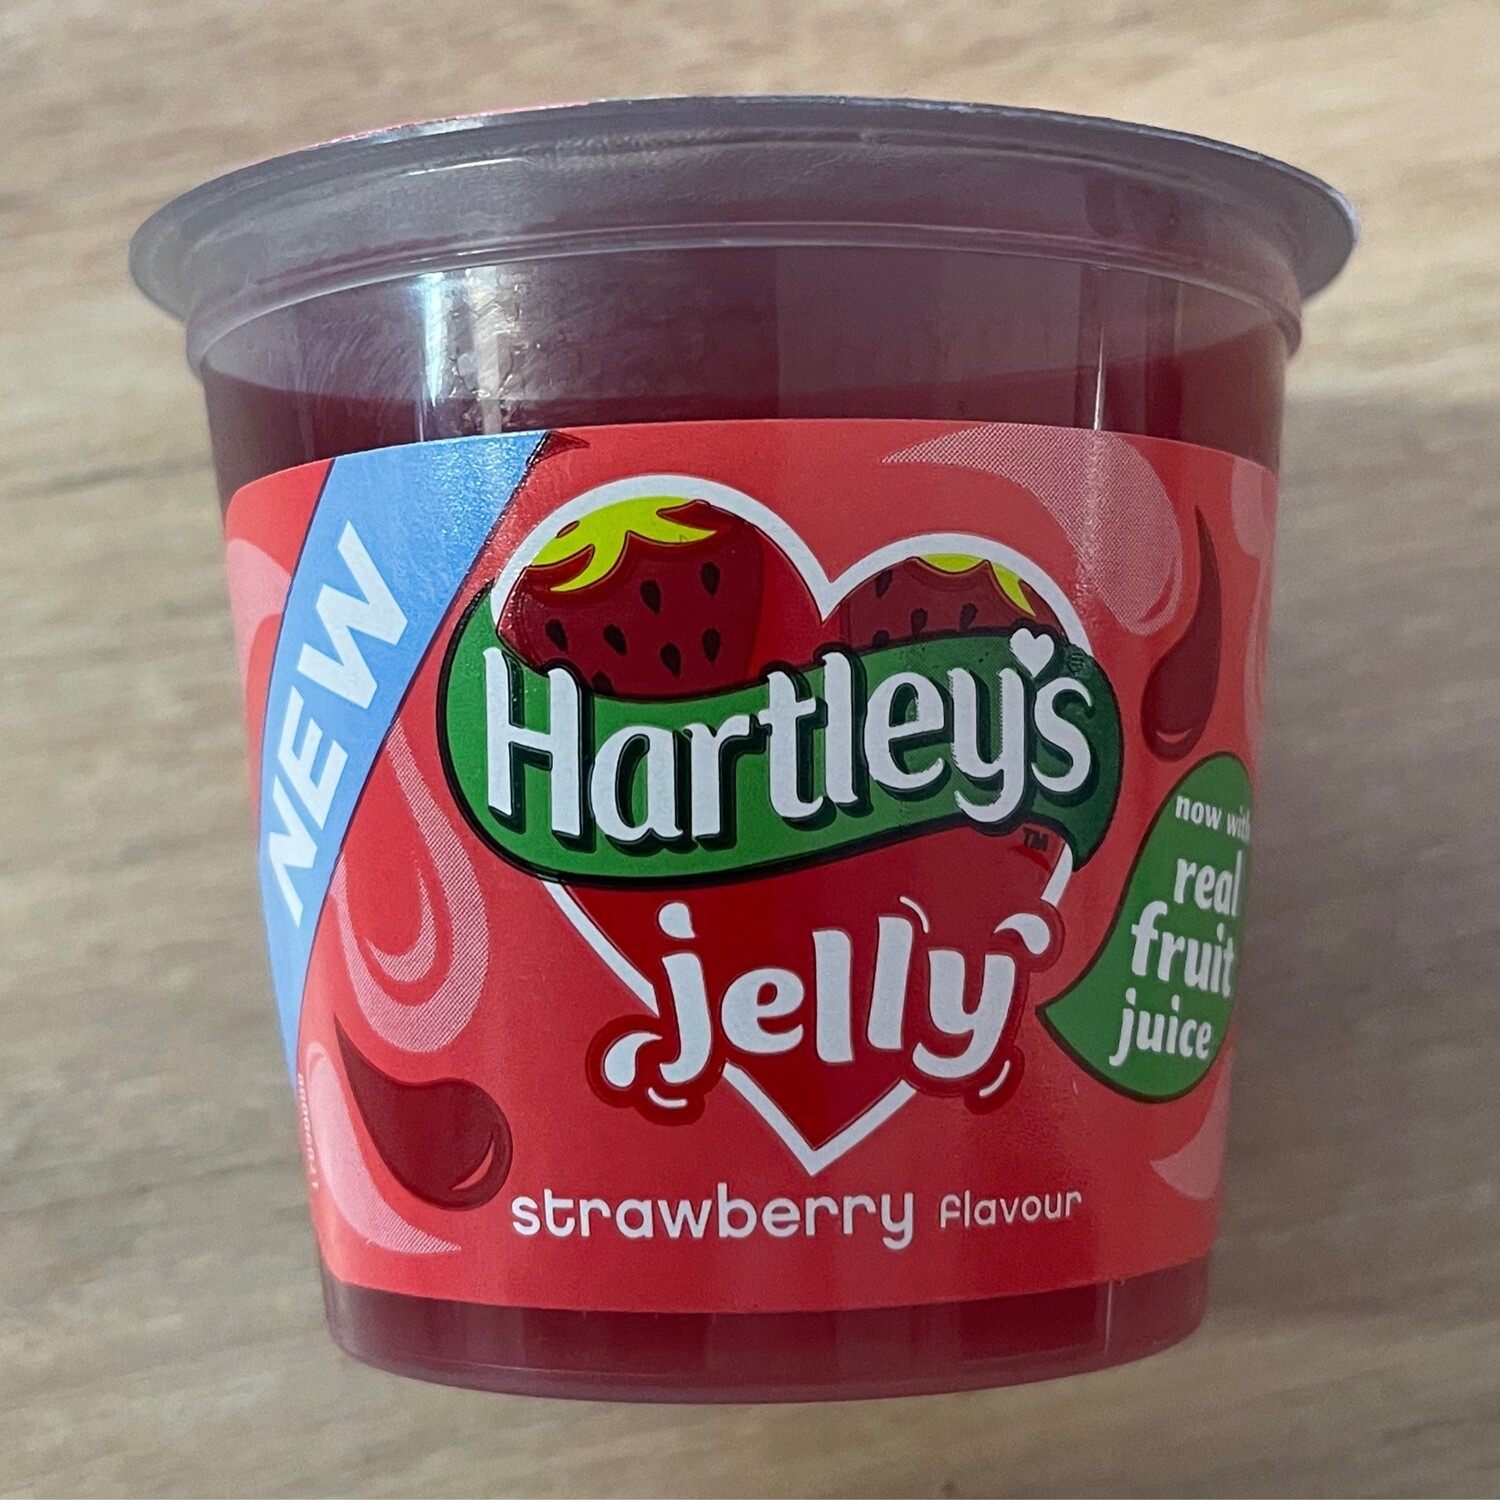 Hartley's Strawberry Jelly Pot (125g)